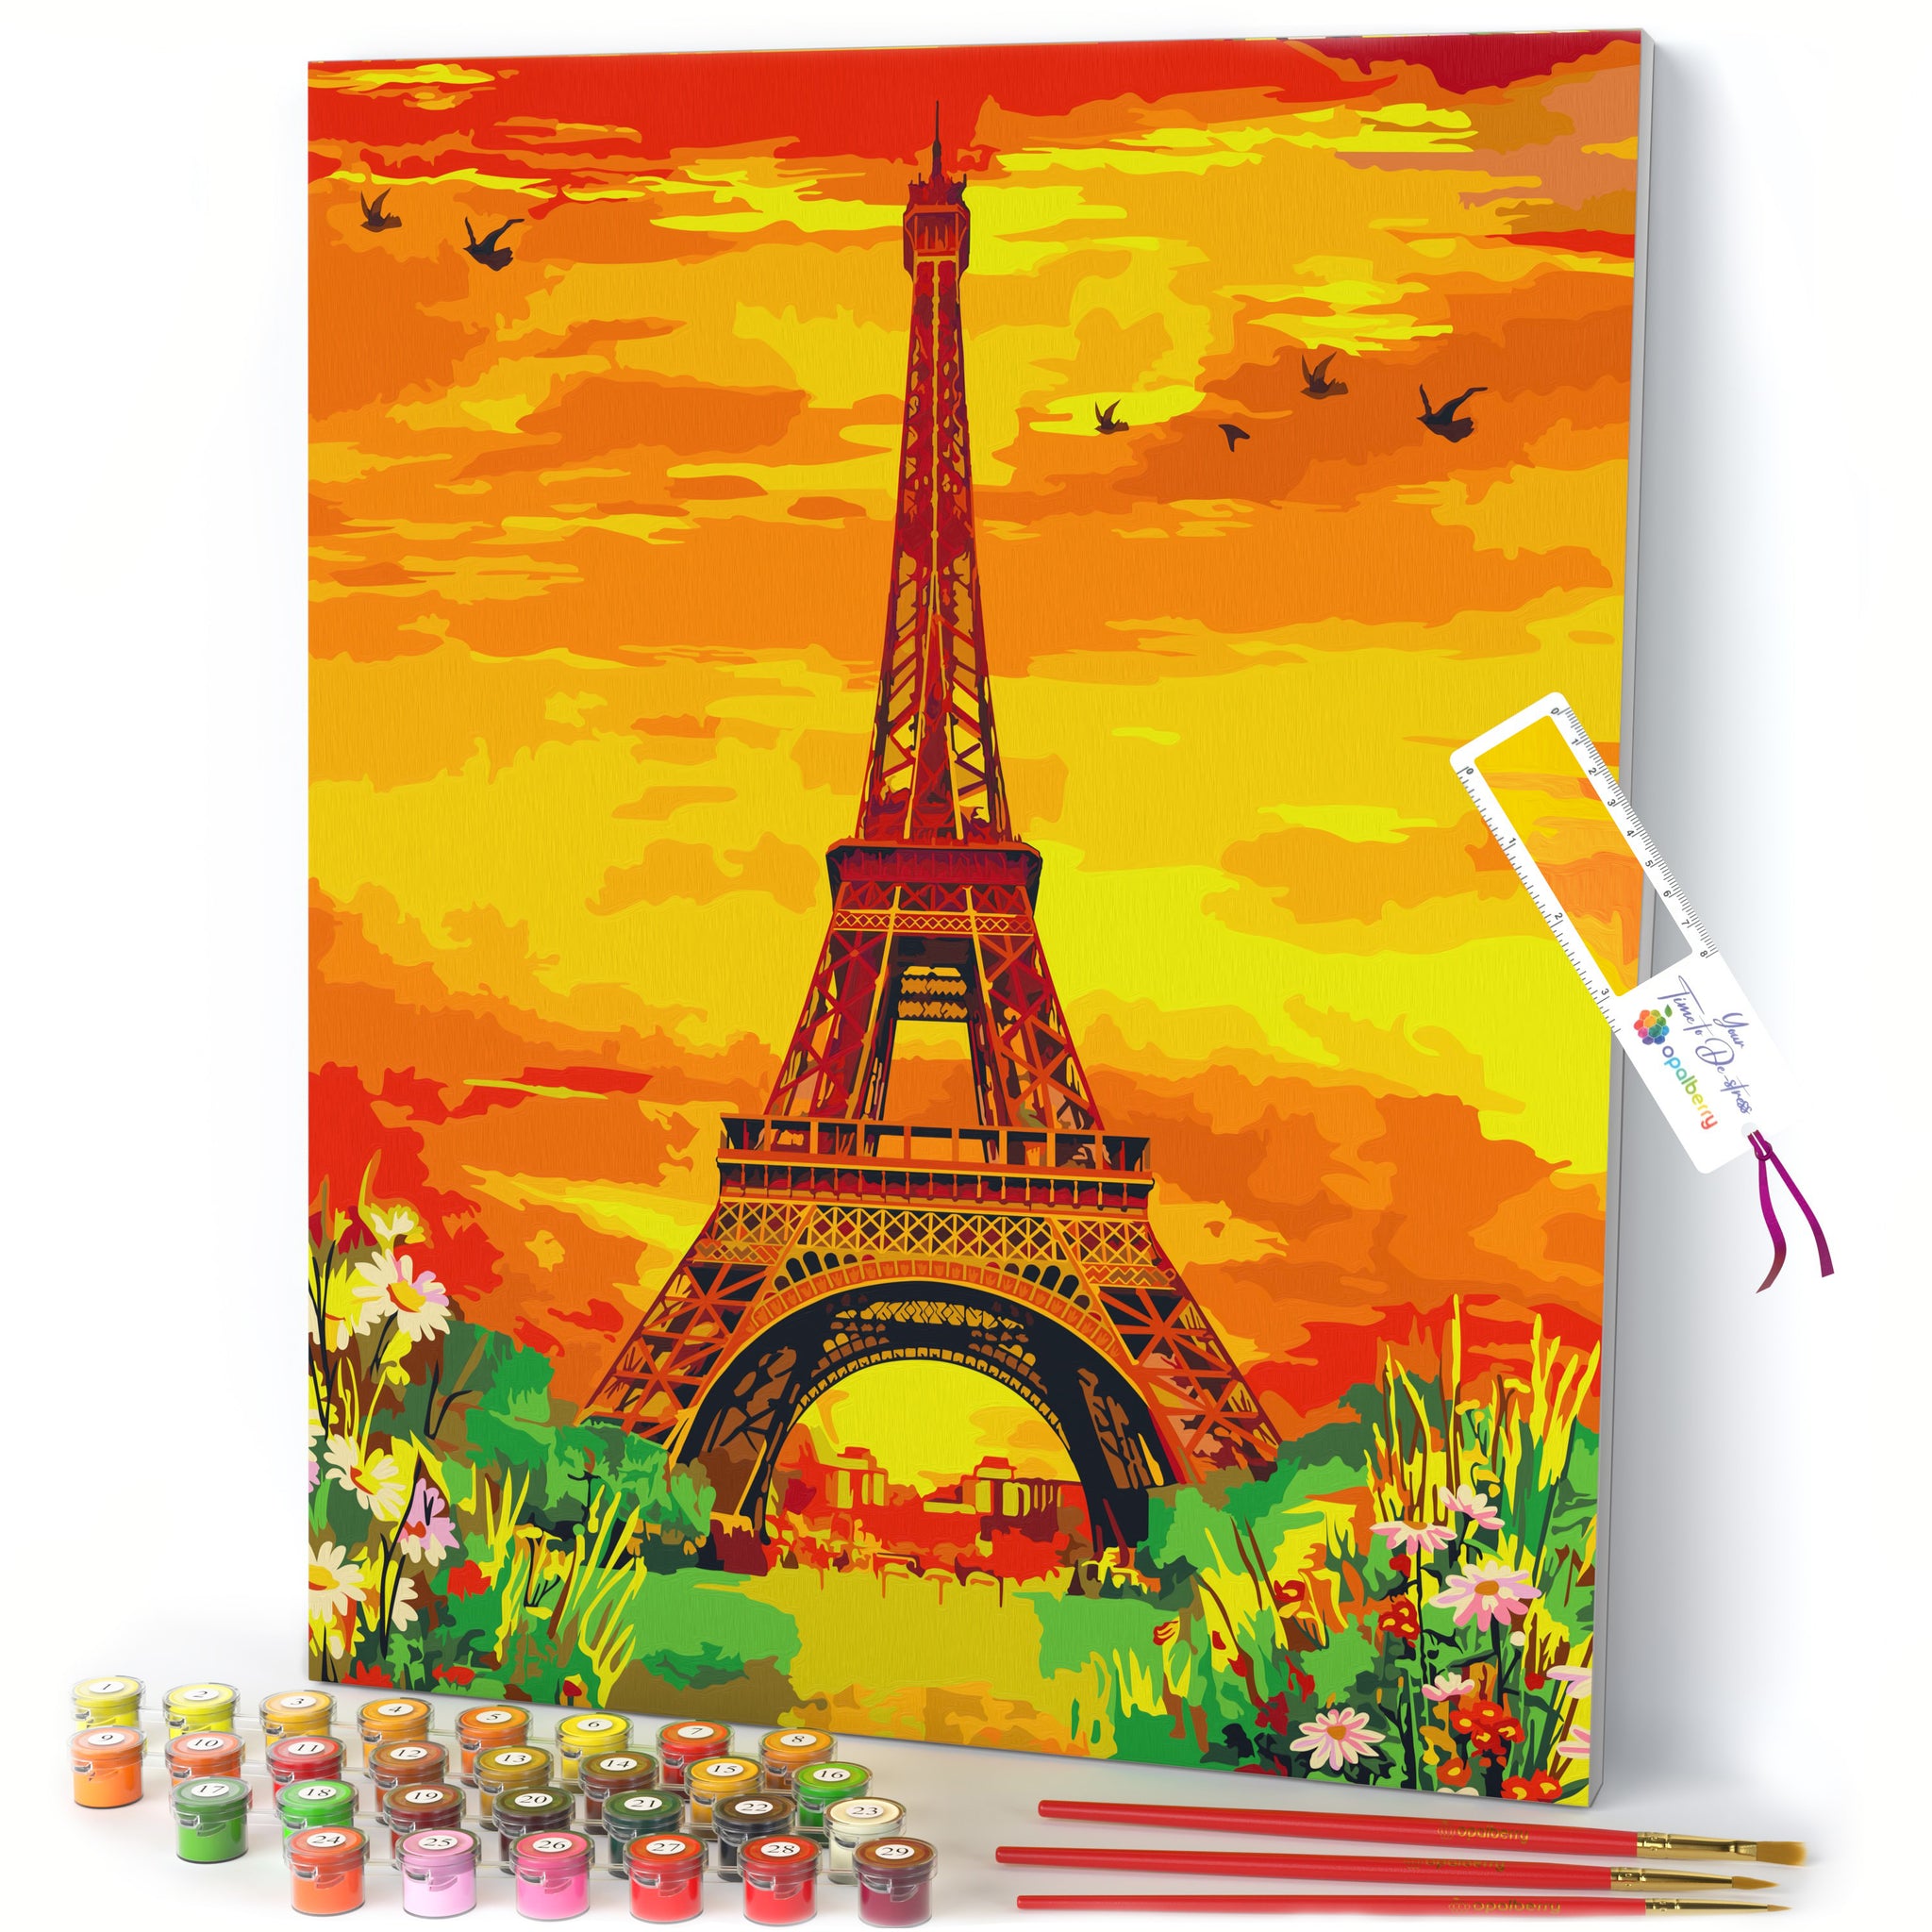 Paint by Numbers 16x20" Framed Canvas for Adults - Eiffel Tower